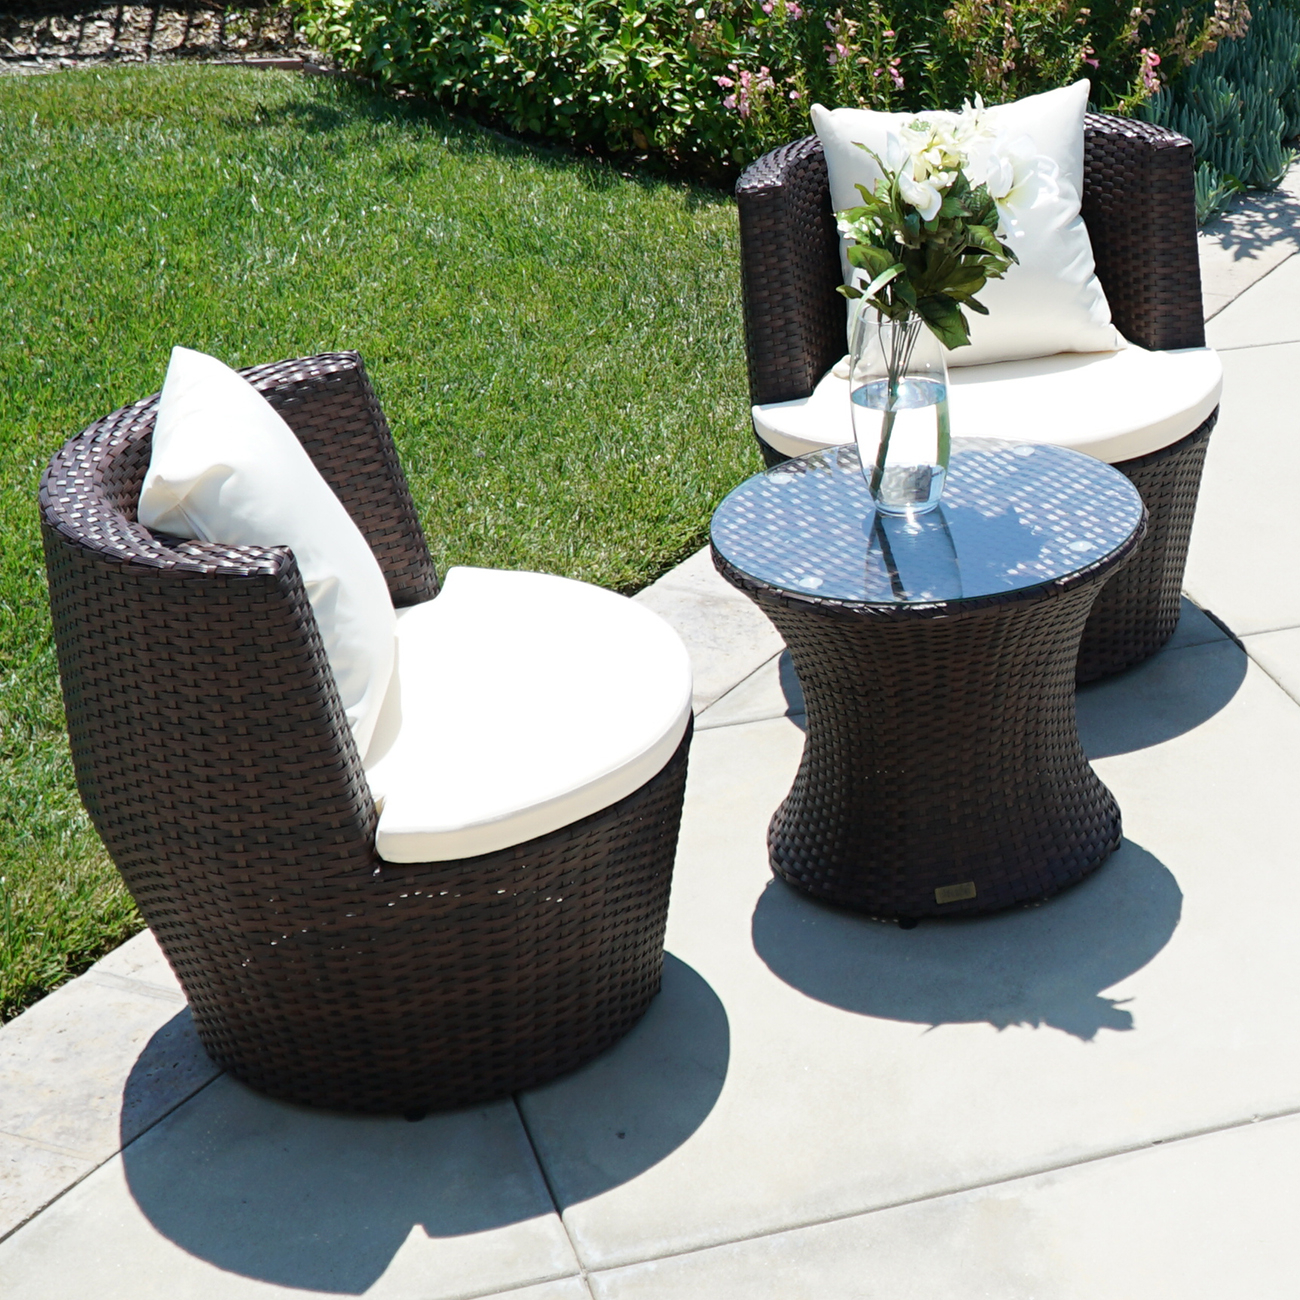 Details About 3 Pc Patio Outdoor Rattan Set Wicker Furniture Glass Table Brown Round Chairs throughout sizing 1300 X 1300